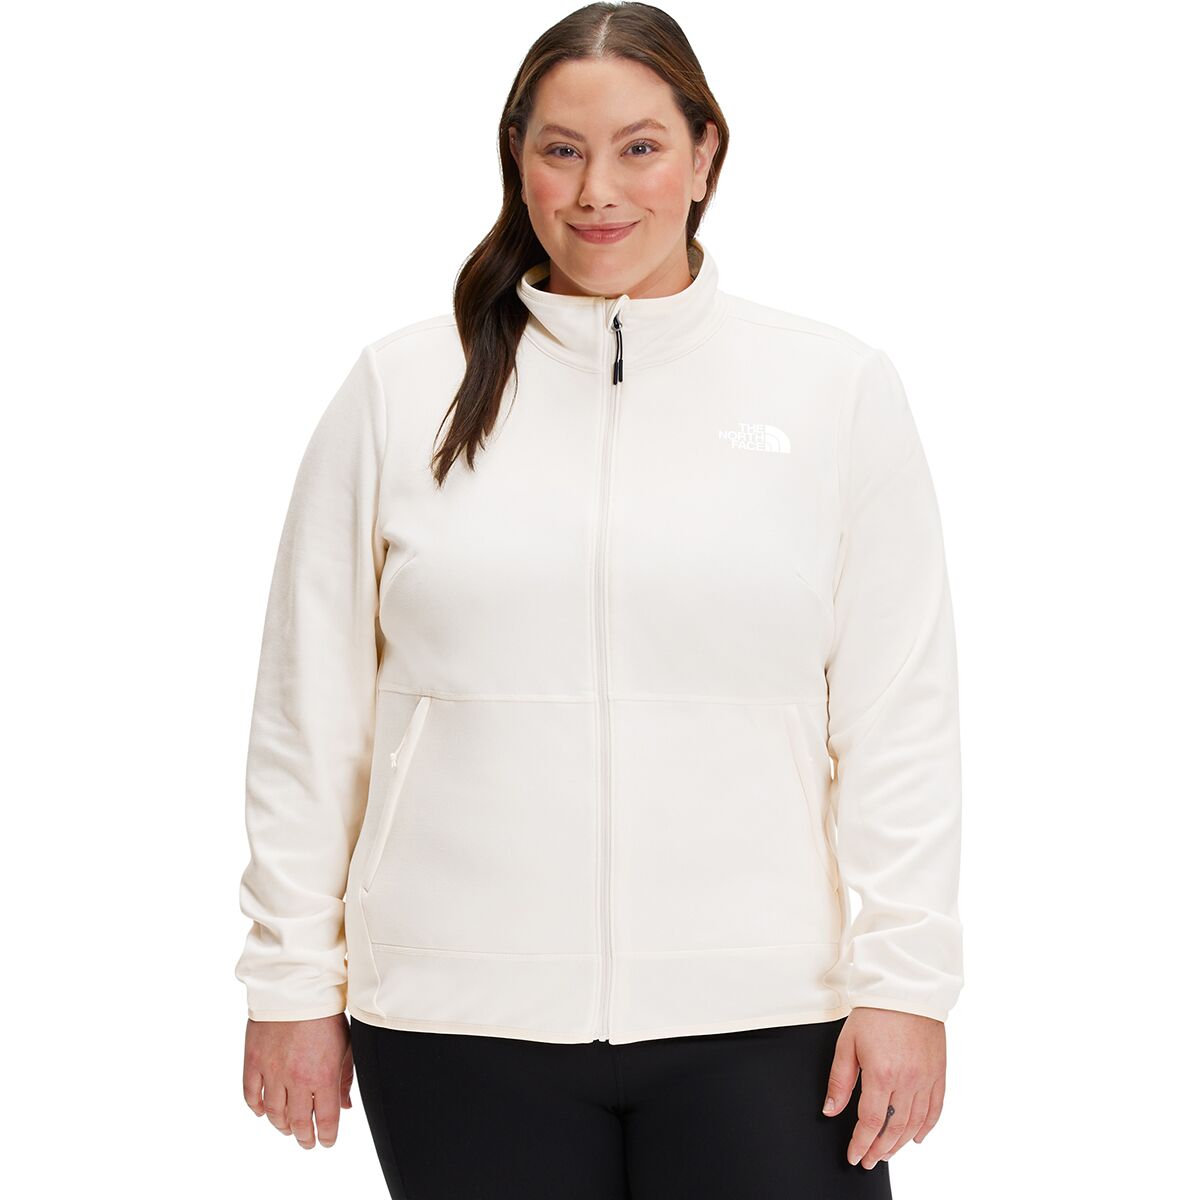 The North Face Canyonlands Full-Zip Plus Jacket - Women's